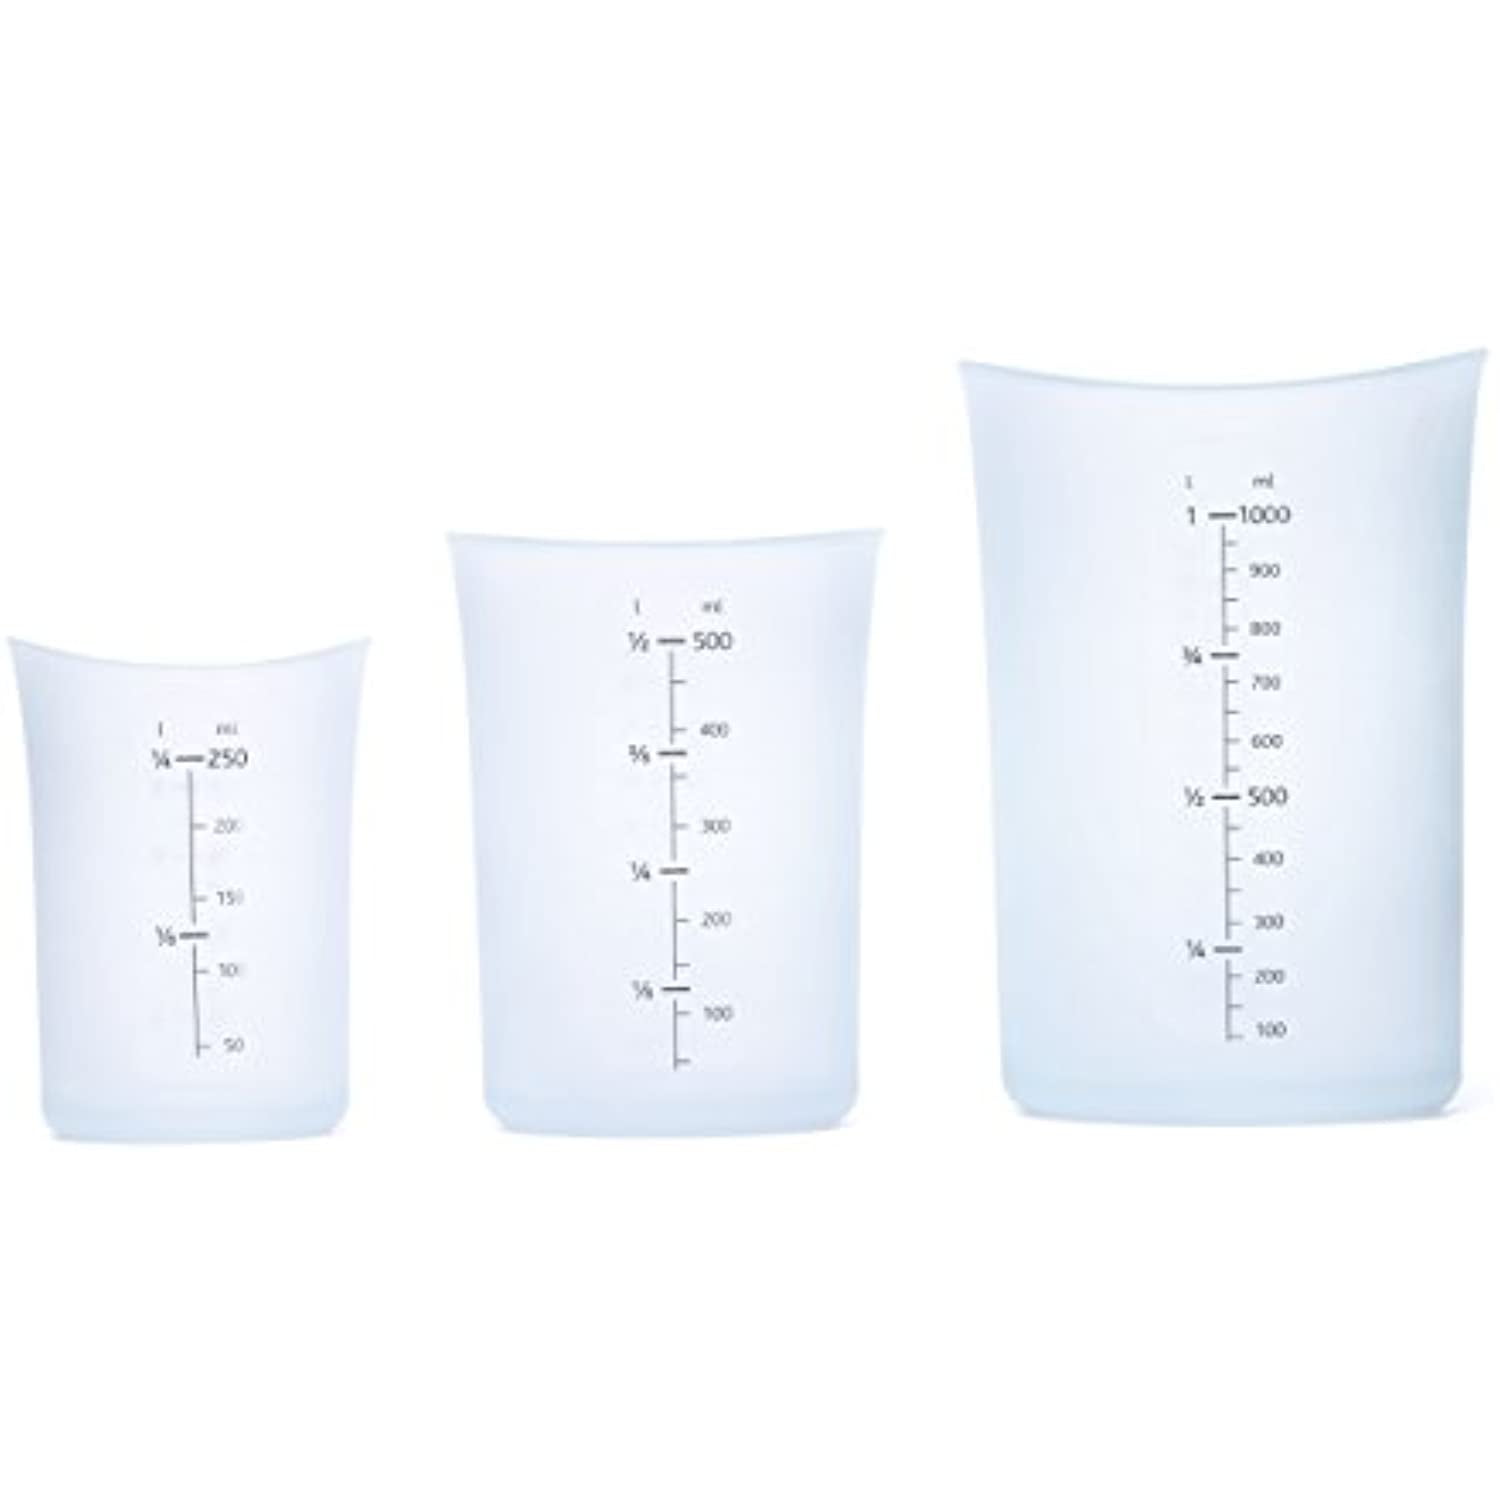 iSi Basics Silicone Flexible Clear Measuring Cup, 2 Ounce, 1 ea